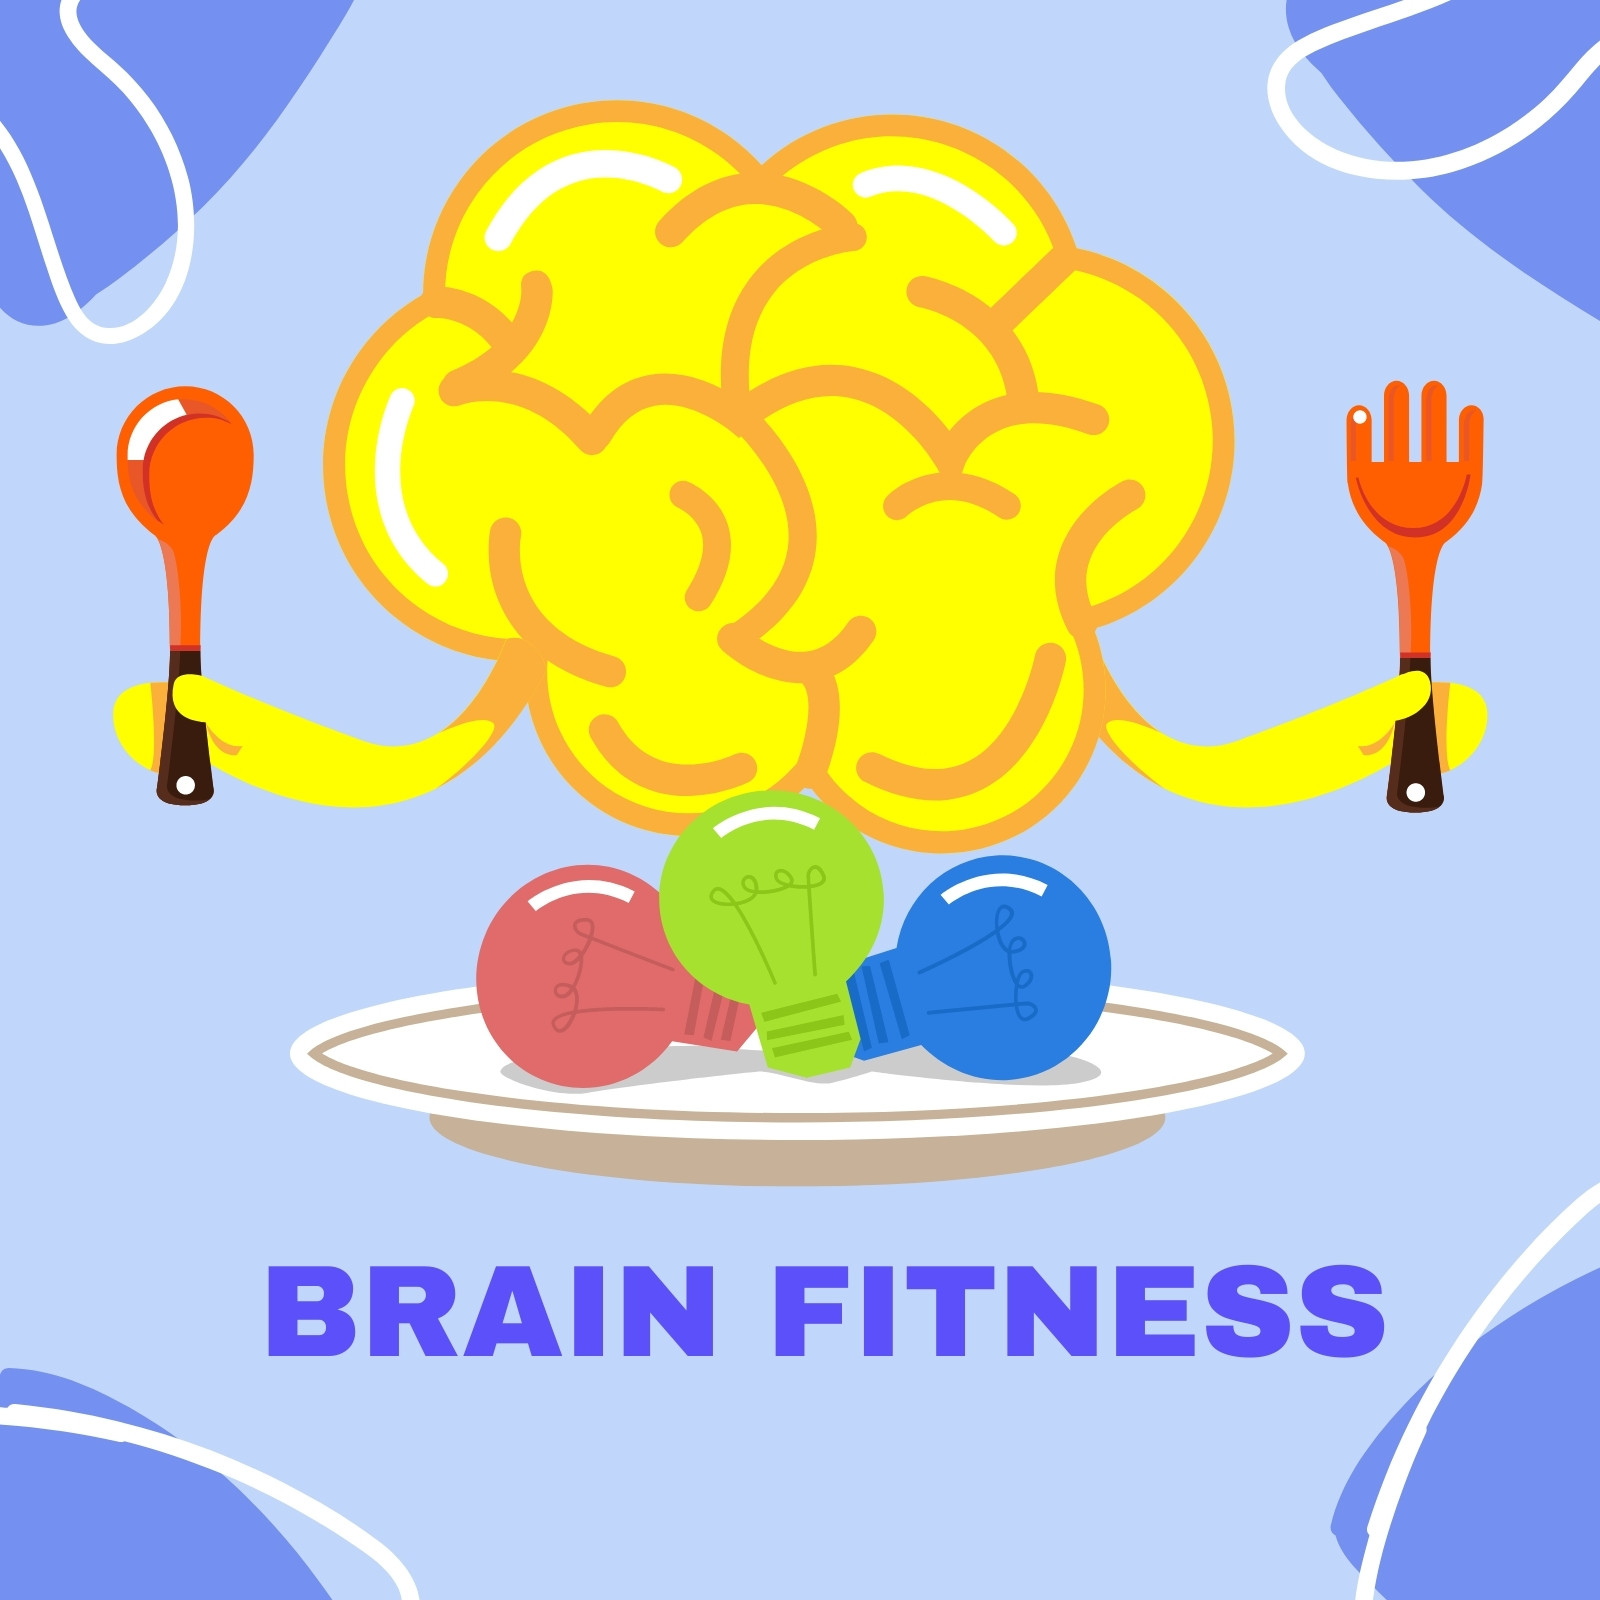 Image of a brain holding a spoon and a fork.